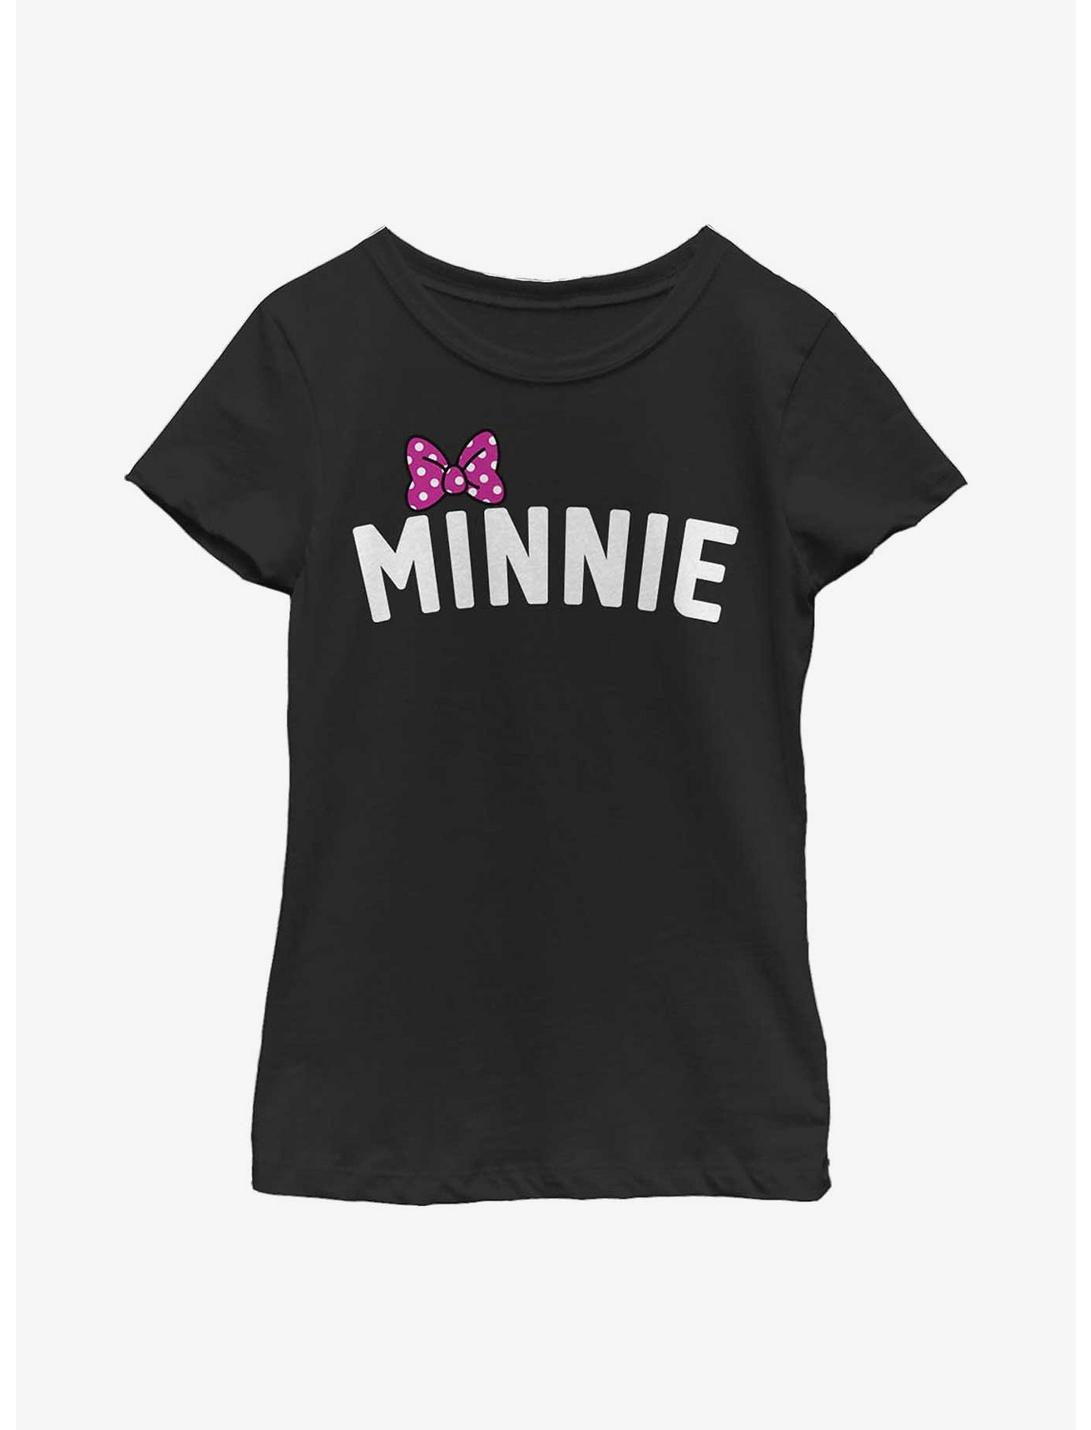 Disney Minnie Mouse Minnie Bow Chest Youth Girls T-Shirt, BLACK, hi-res